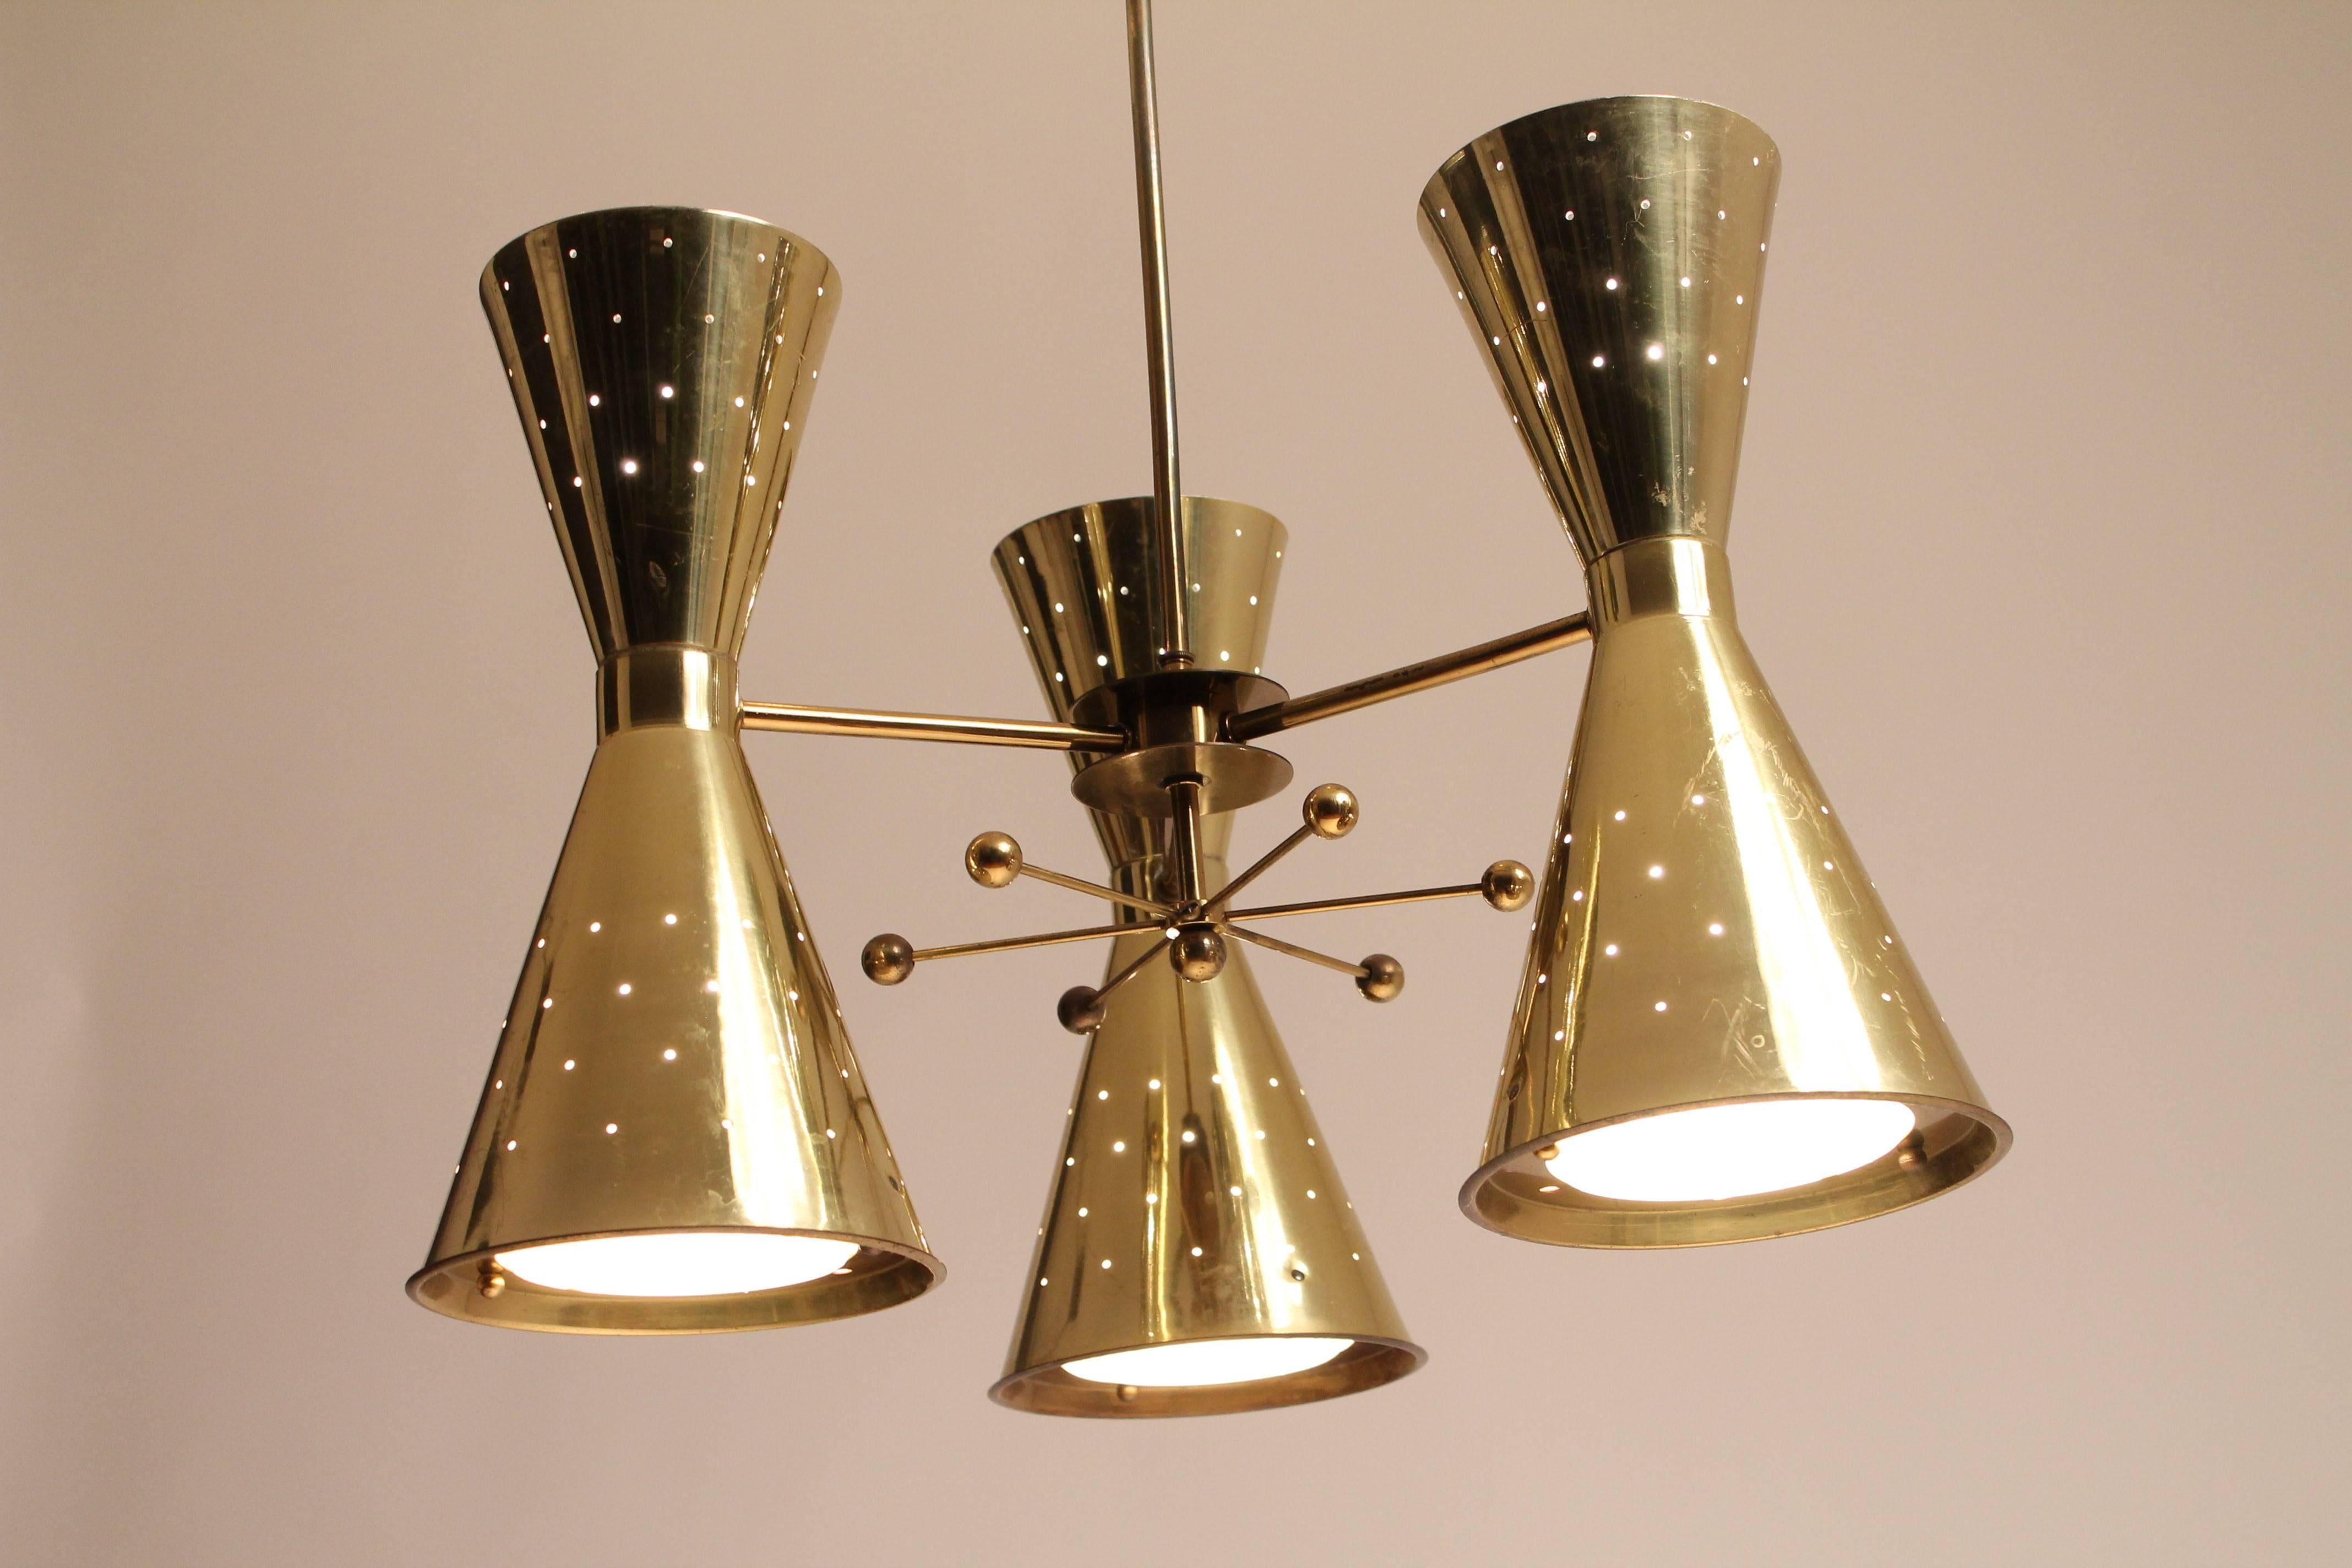 Each pierced brass-plated shade is 14 inches high by 7 inches diameter for the lower portion. All remaining hardware is made of brass.

Under each shade, there is glass lens (Fresnel) made to disperse light evenly. A brass outer ring held by two